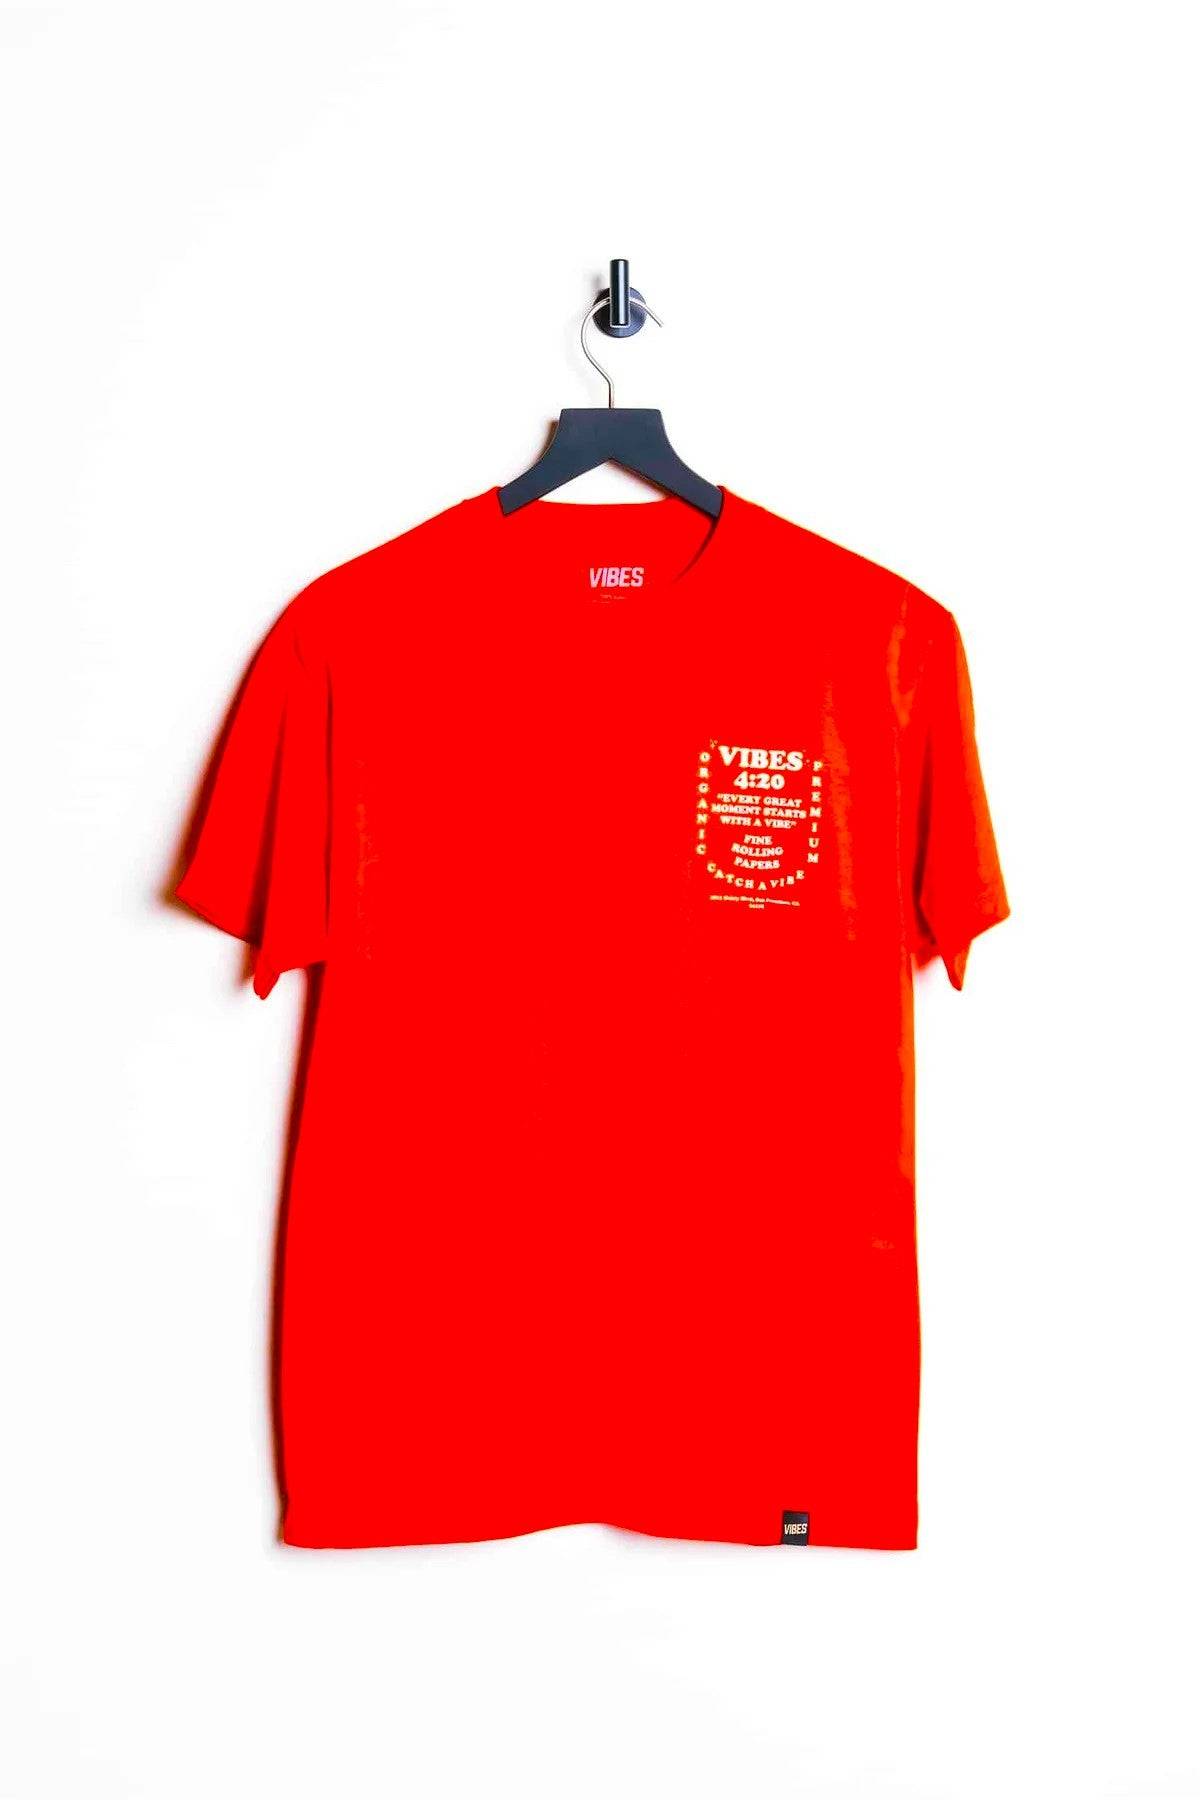 VIBES Red Starts With Vibe T-Shirt 2X-Large